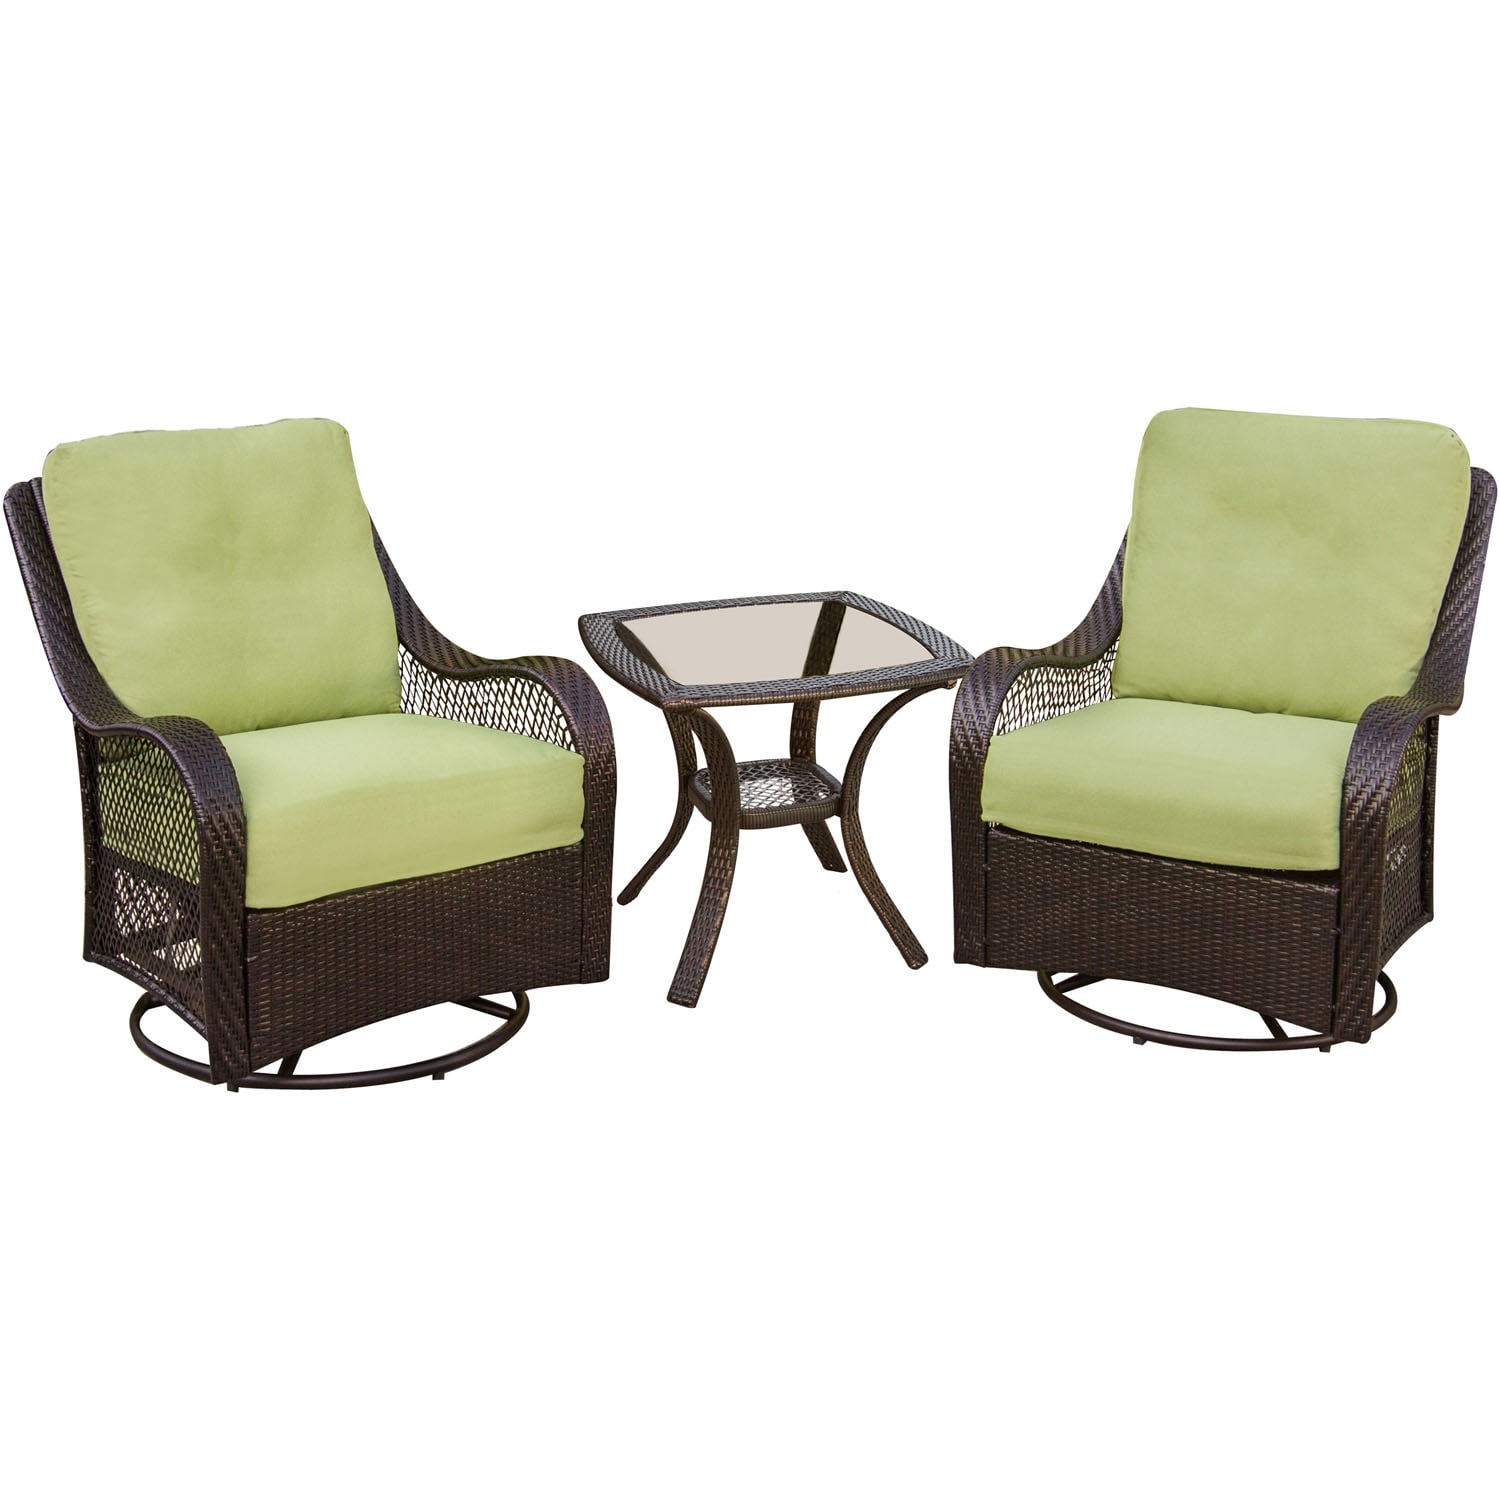 Hanover Orleans3pcsw Orleans Avocado Green Rattan 3-piece Outdoor Swivel Rocking Chat Set